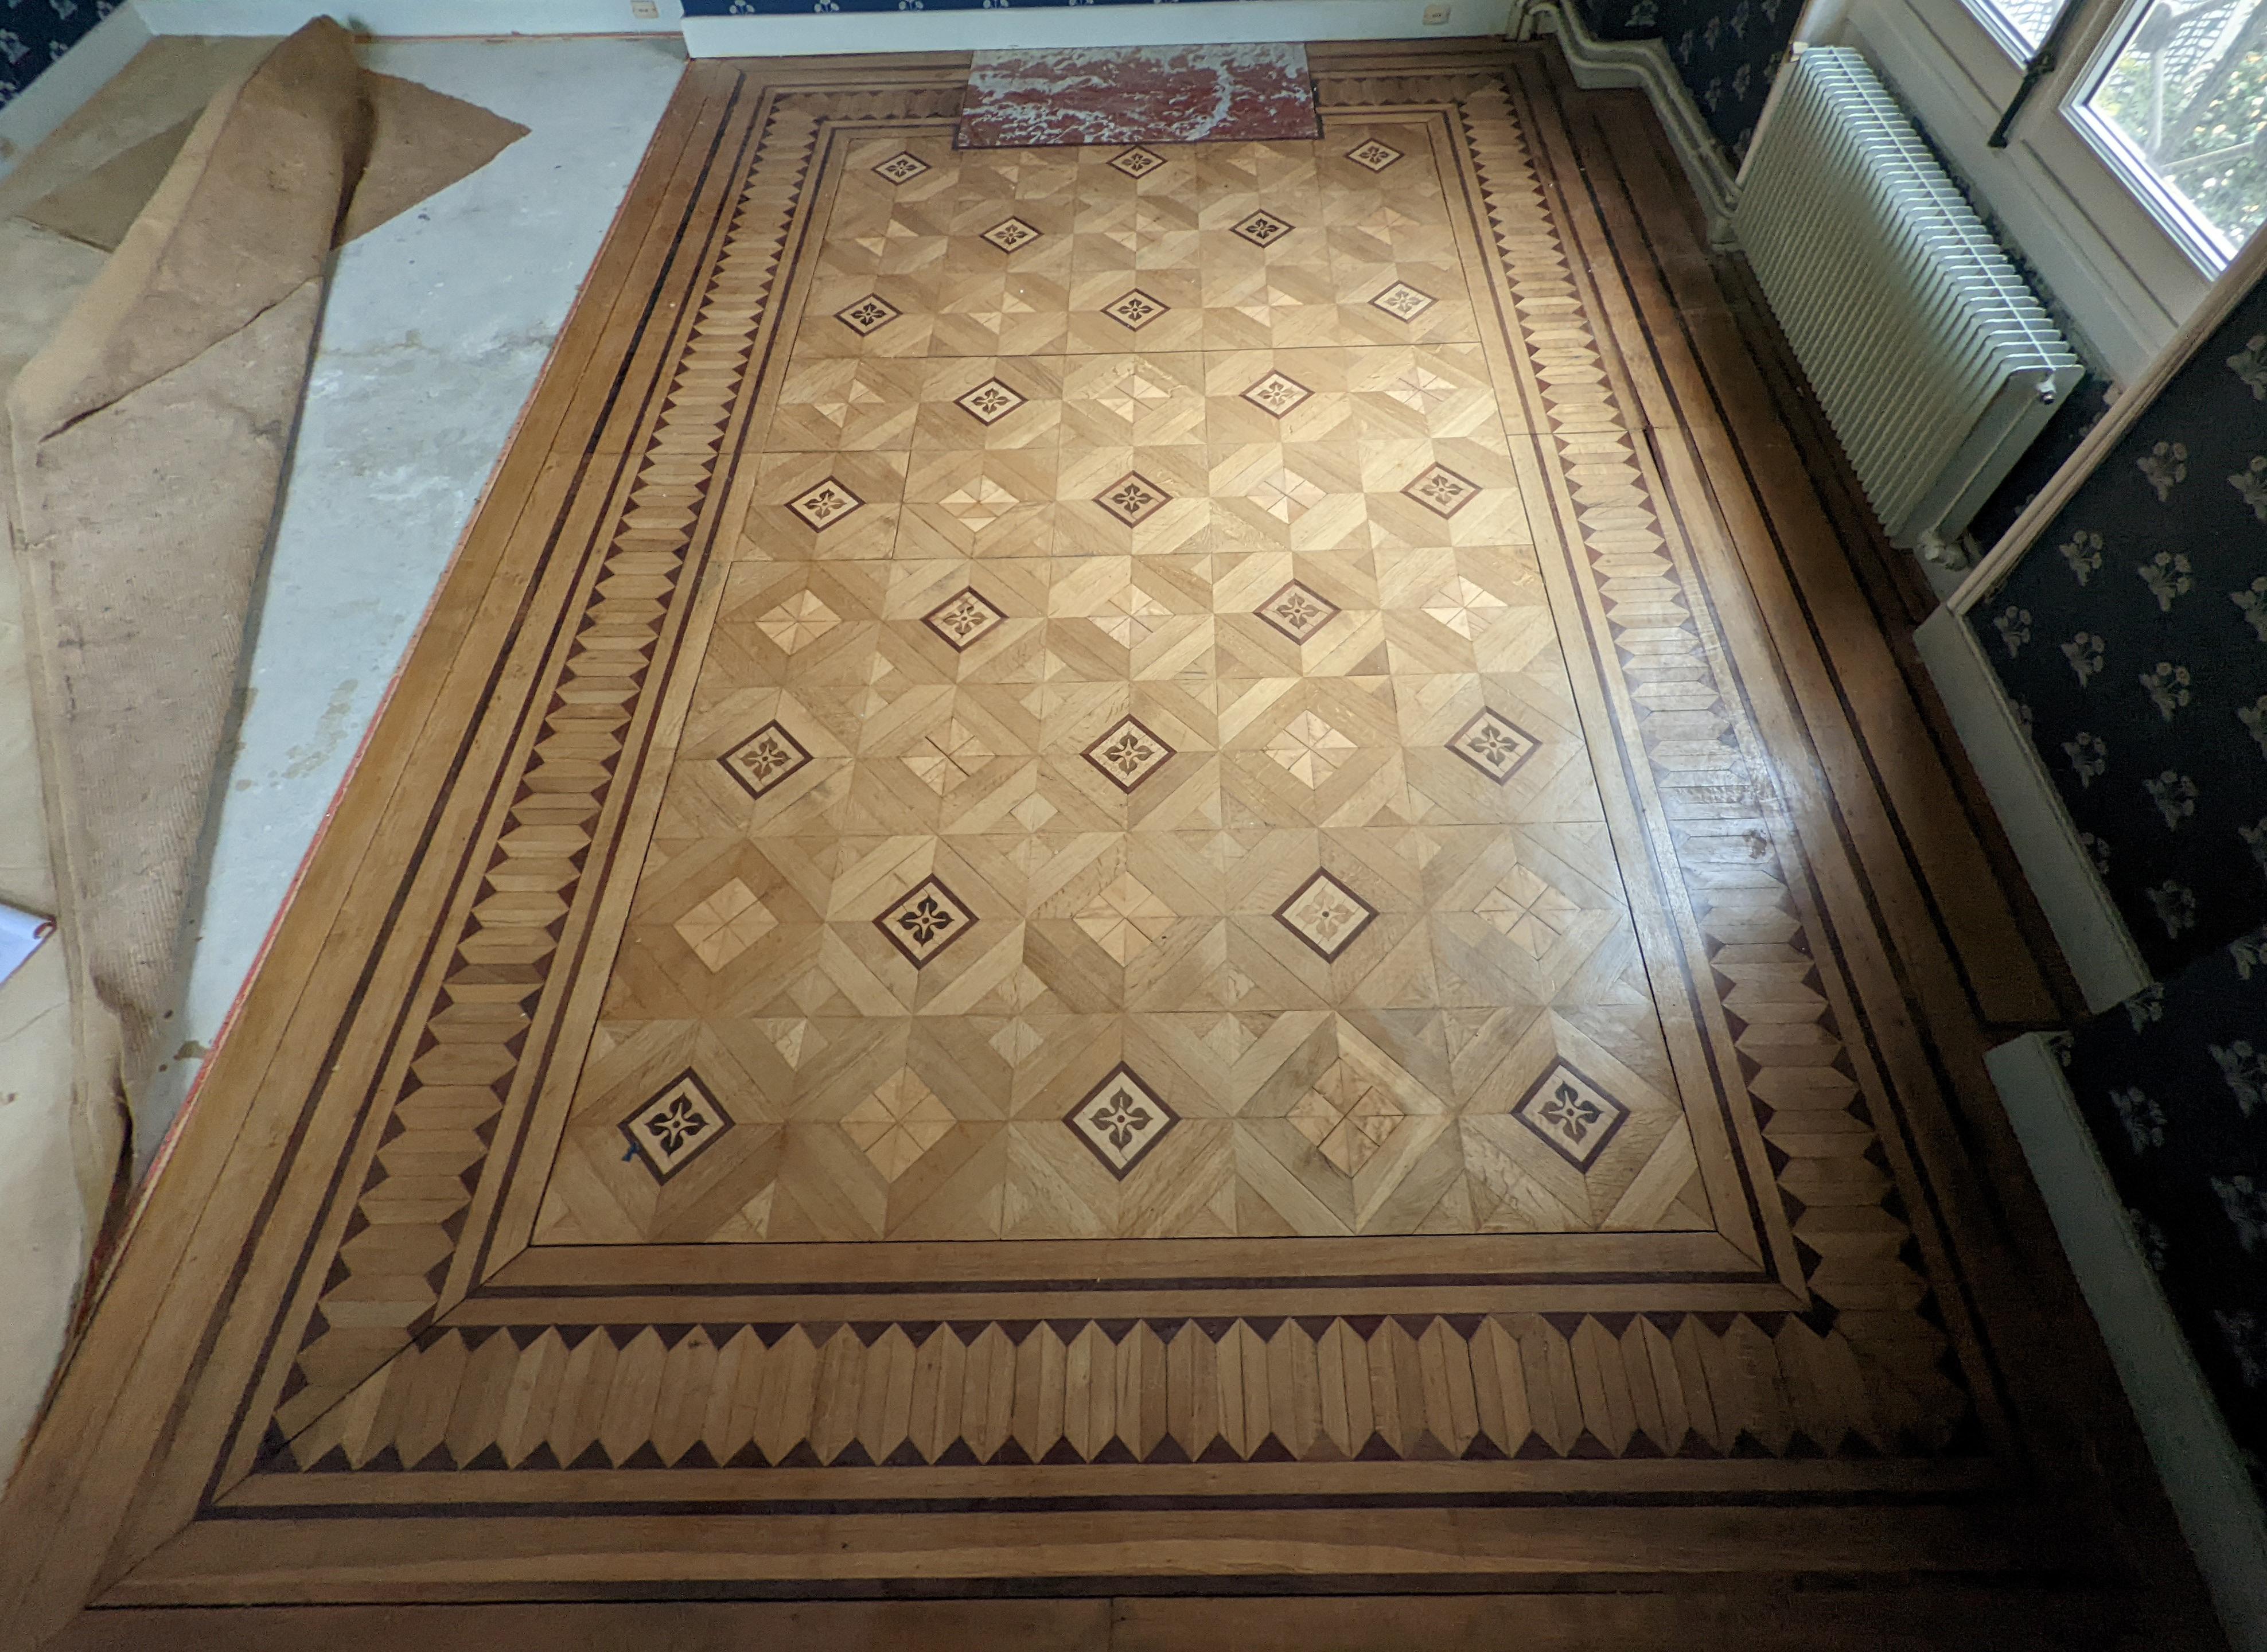 This very beautiful parquet flooring of about 9 m² is covering a rectangular surface of 4 meters by 2.62 meters. It is from a private domestic house from the late 19th century. It is special for its mixture of different woods, such as oak wood,